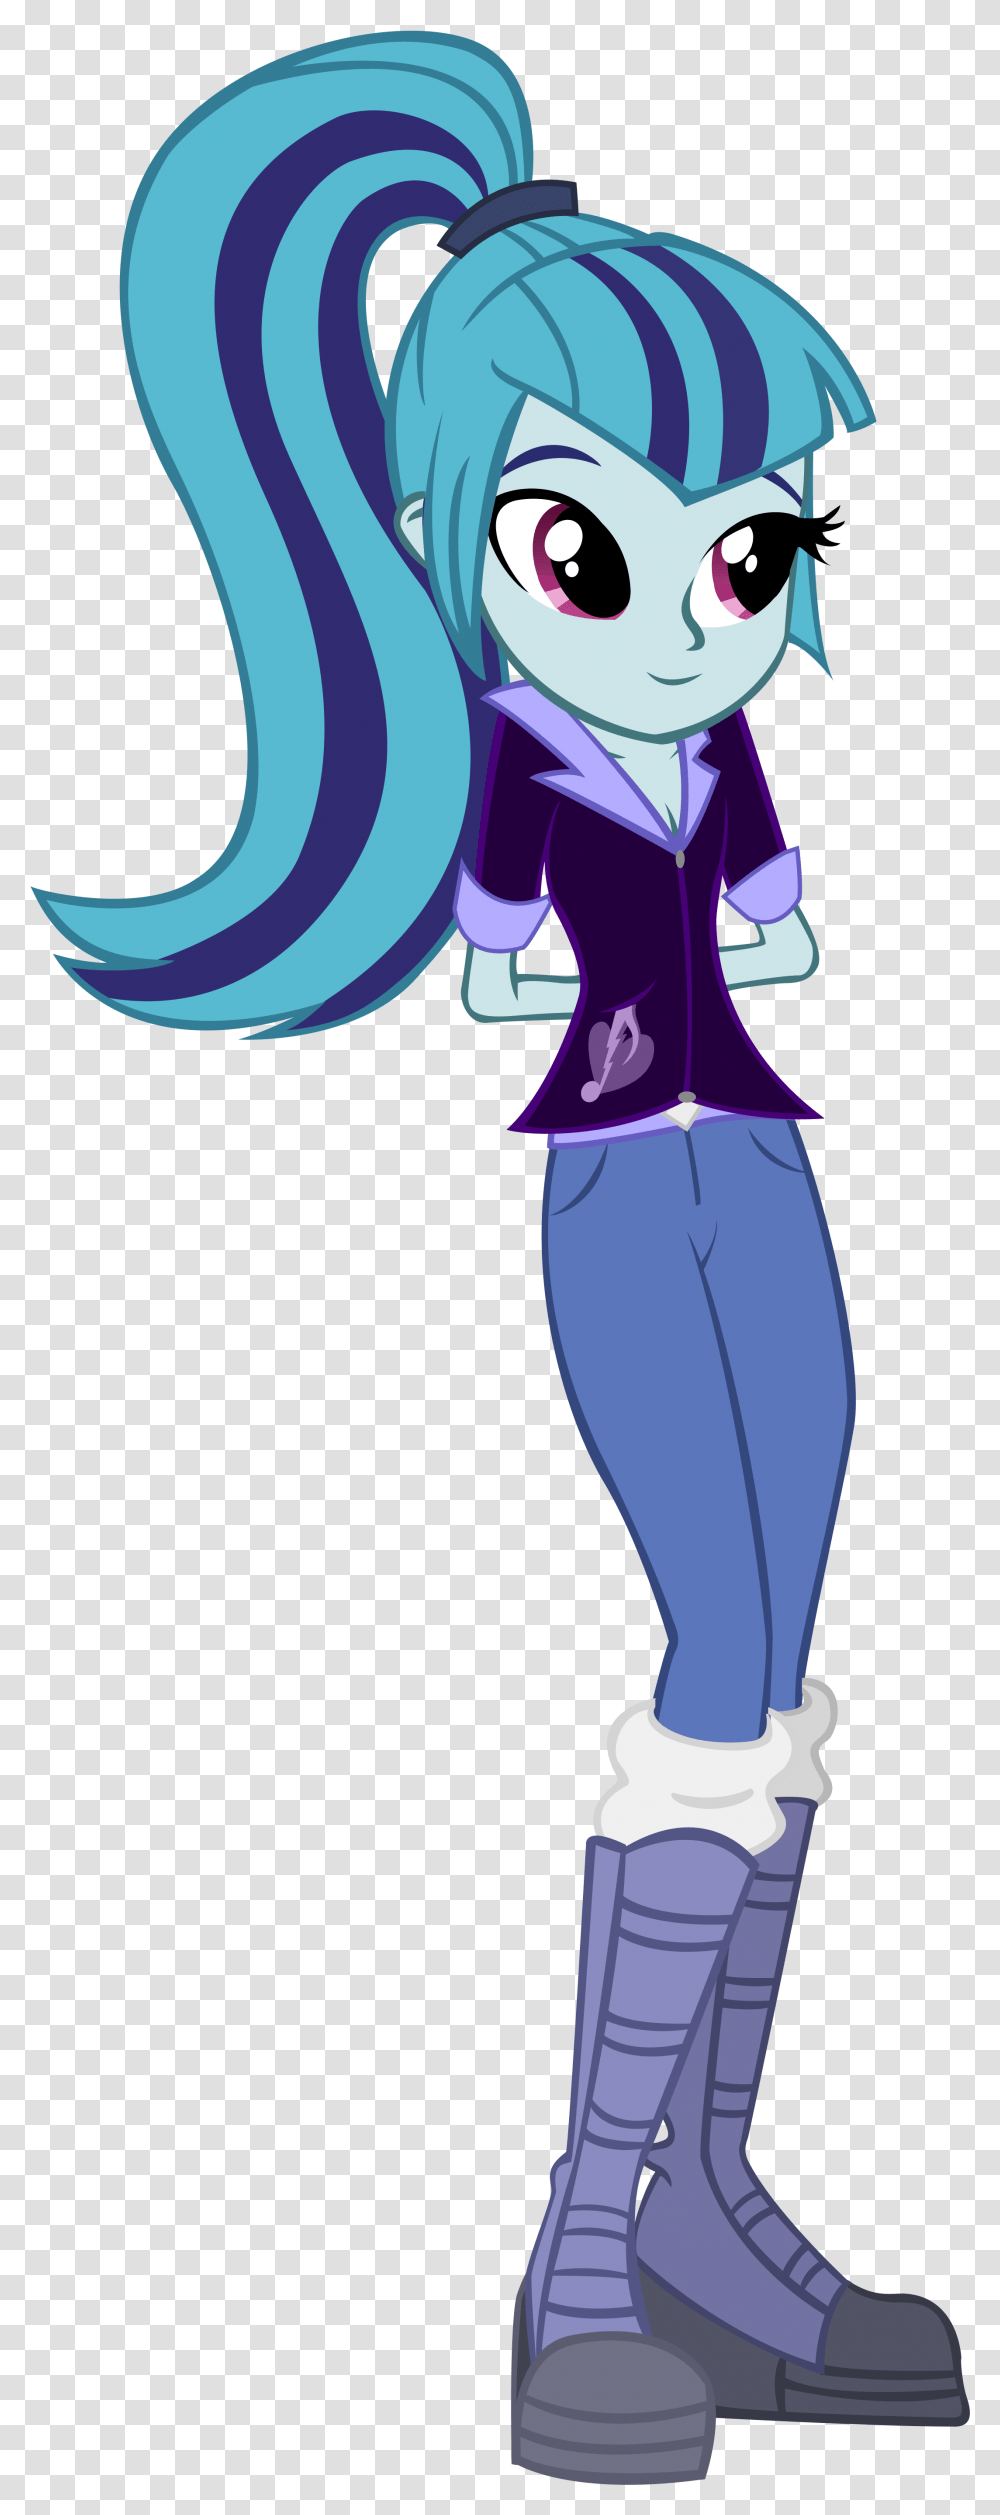 My Little Pony Equestria Girl Sonata My Little Pony Equestria Girl Sonata Dusk, Apparel, Costume, Toy Transparent Png